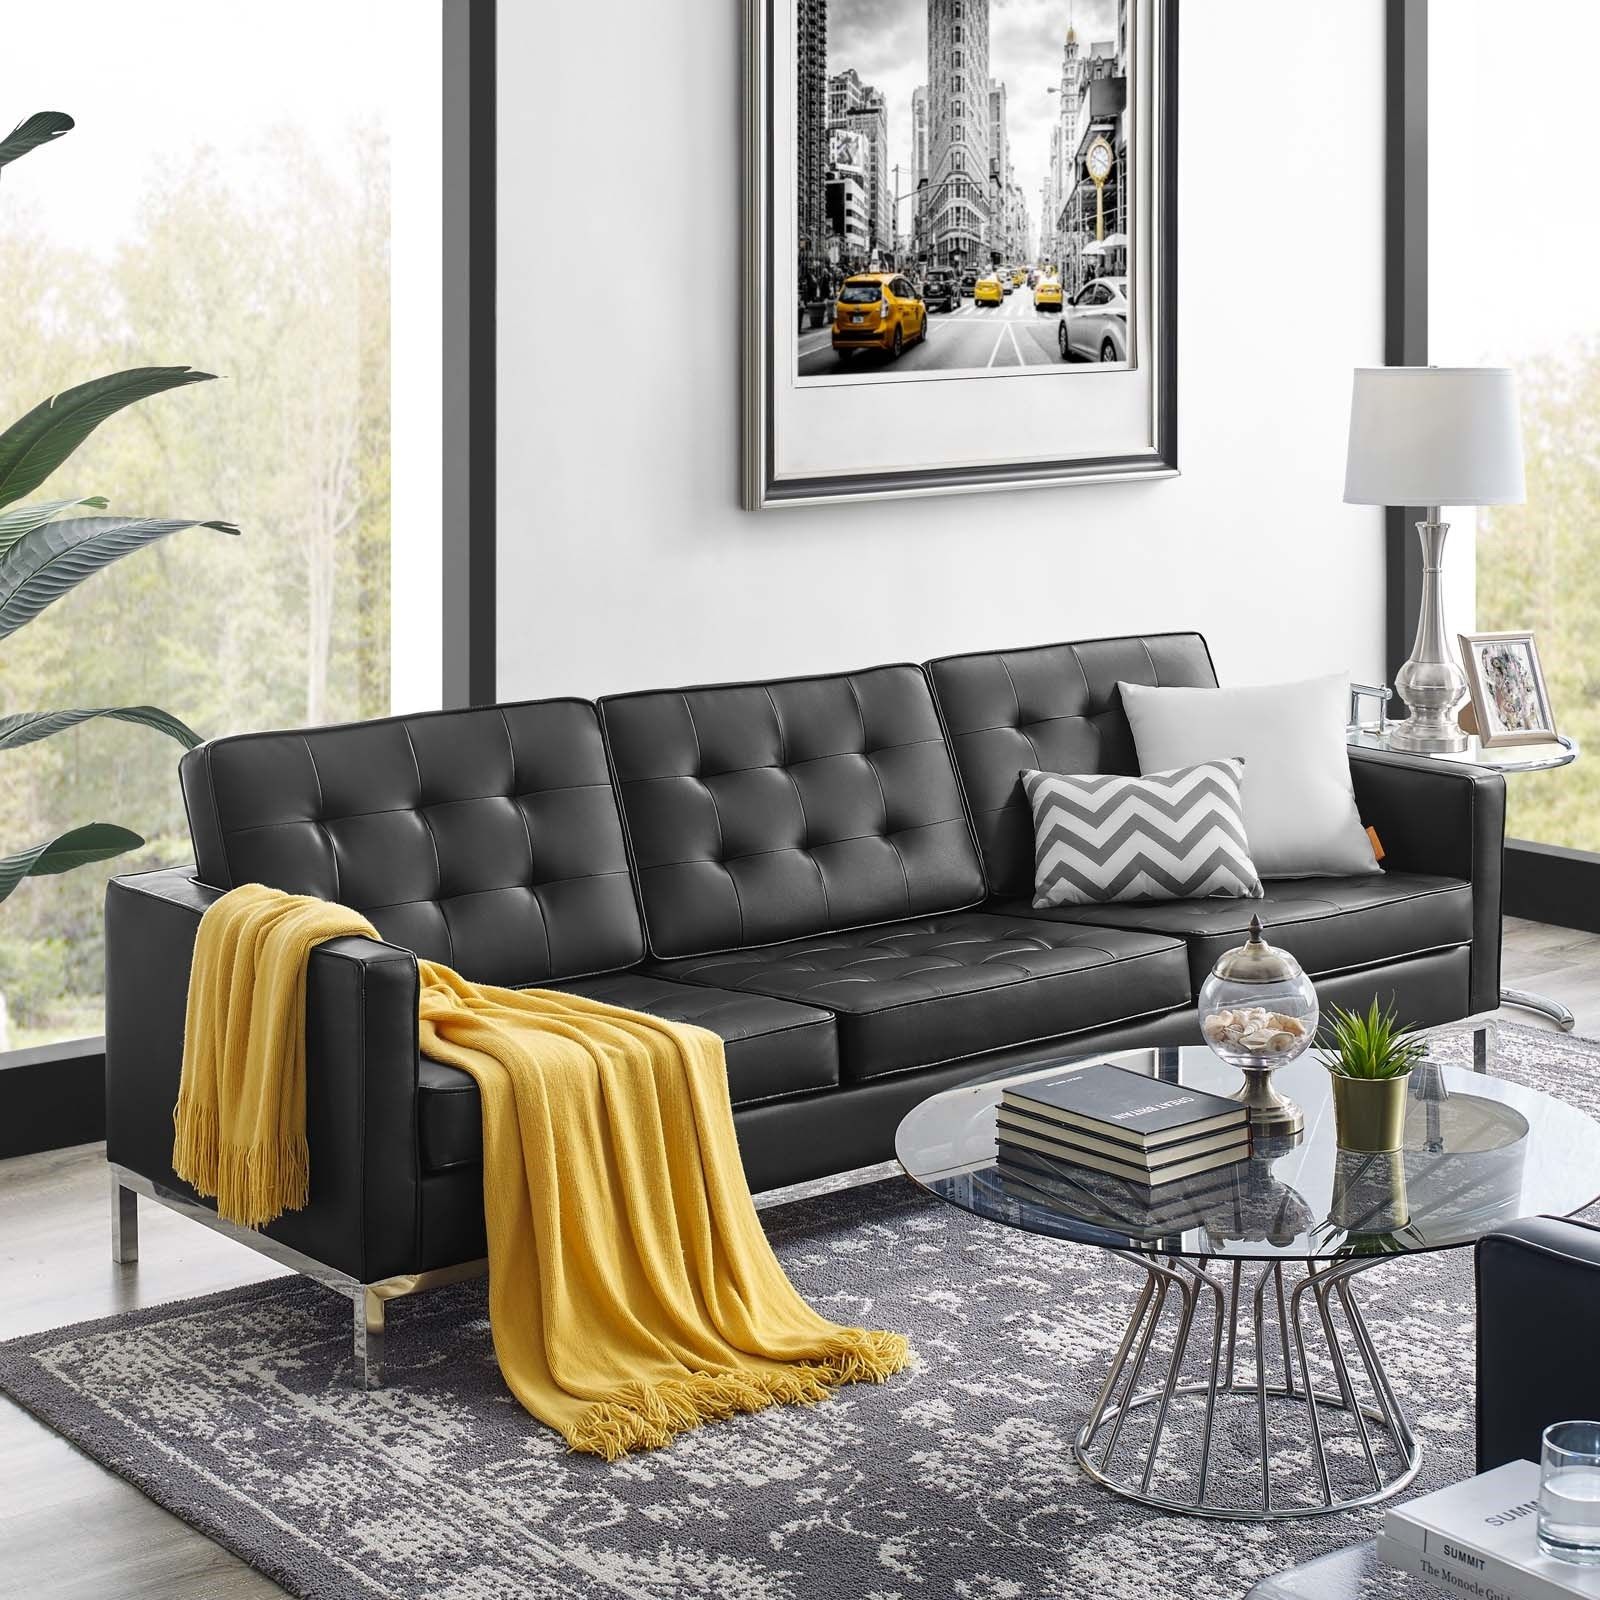 Loft Tufted Upholstered Faux Leather Sofa In Silver Black – Hyme Furniture Within Faux Leather Sofas (Gallery 10 of 21)